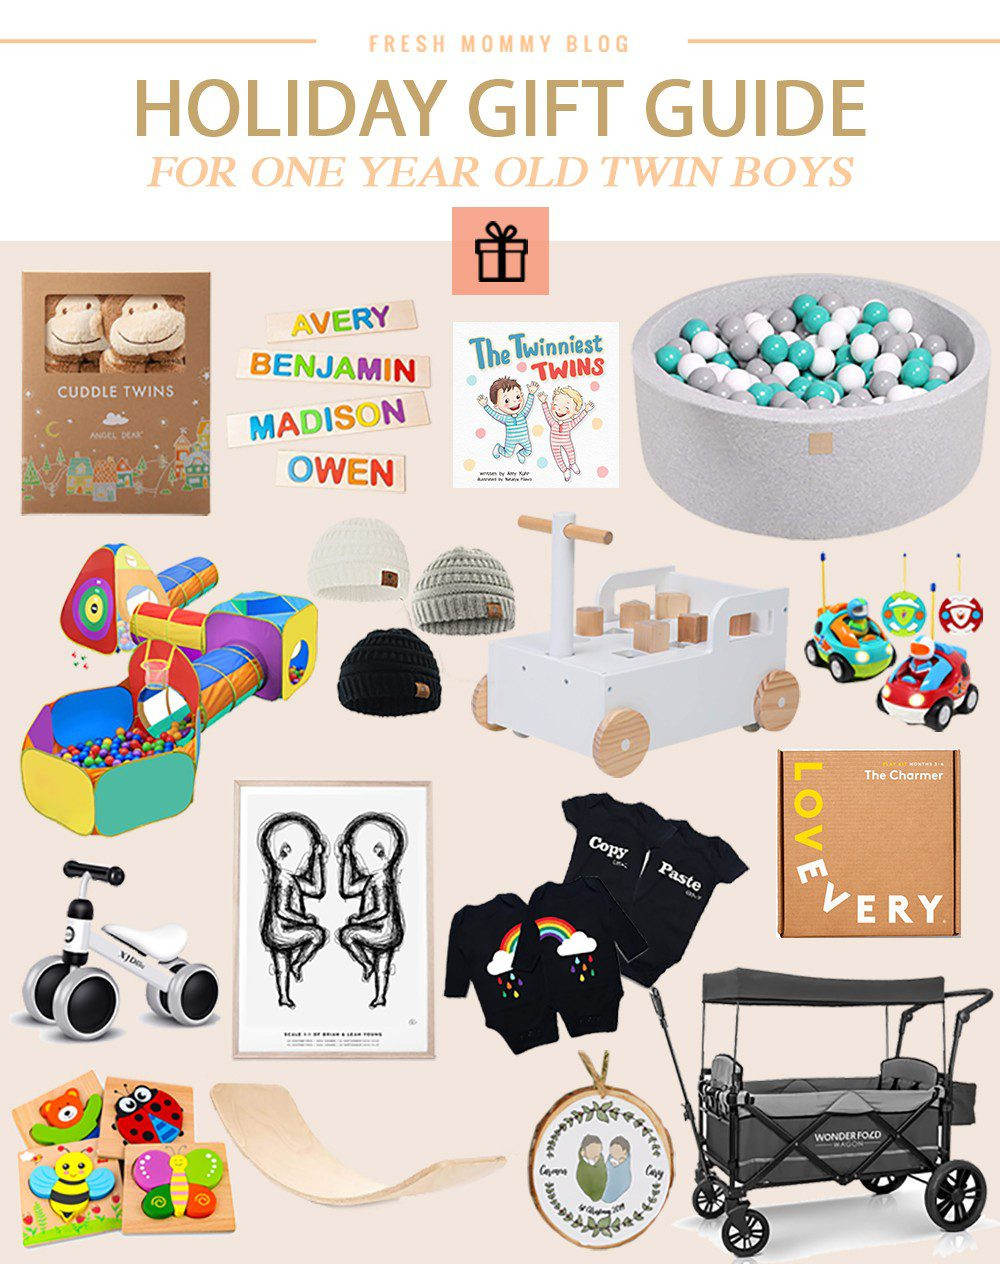 Gift Ideas For Twin Boys
 16 Best Gift Ideas for e Year Old Twin Boys